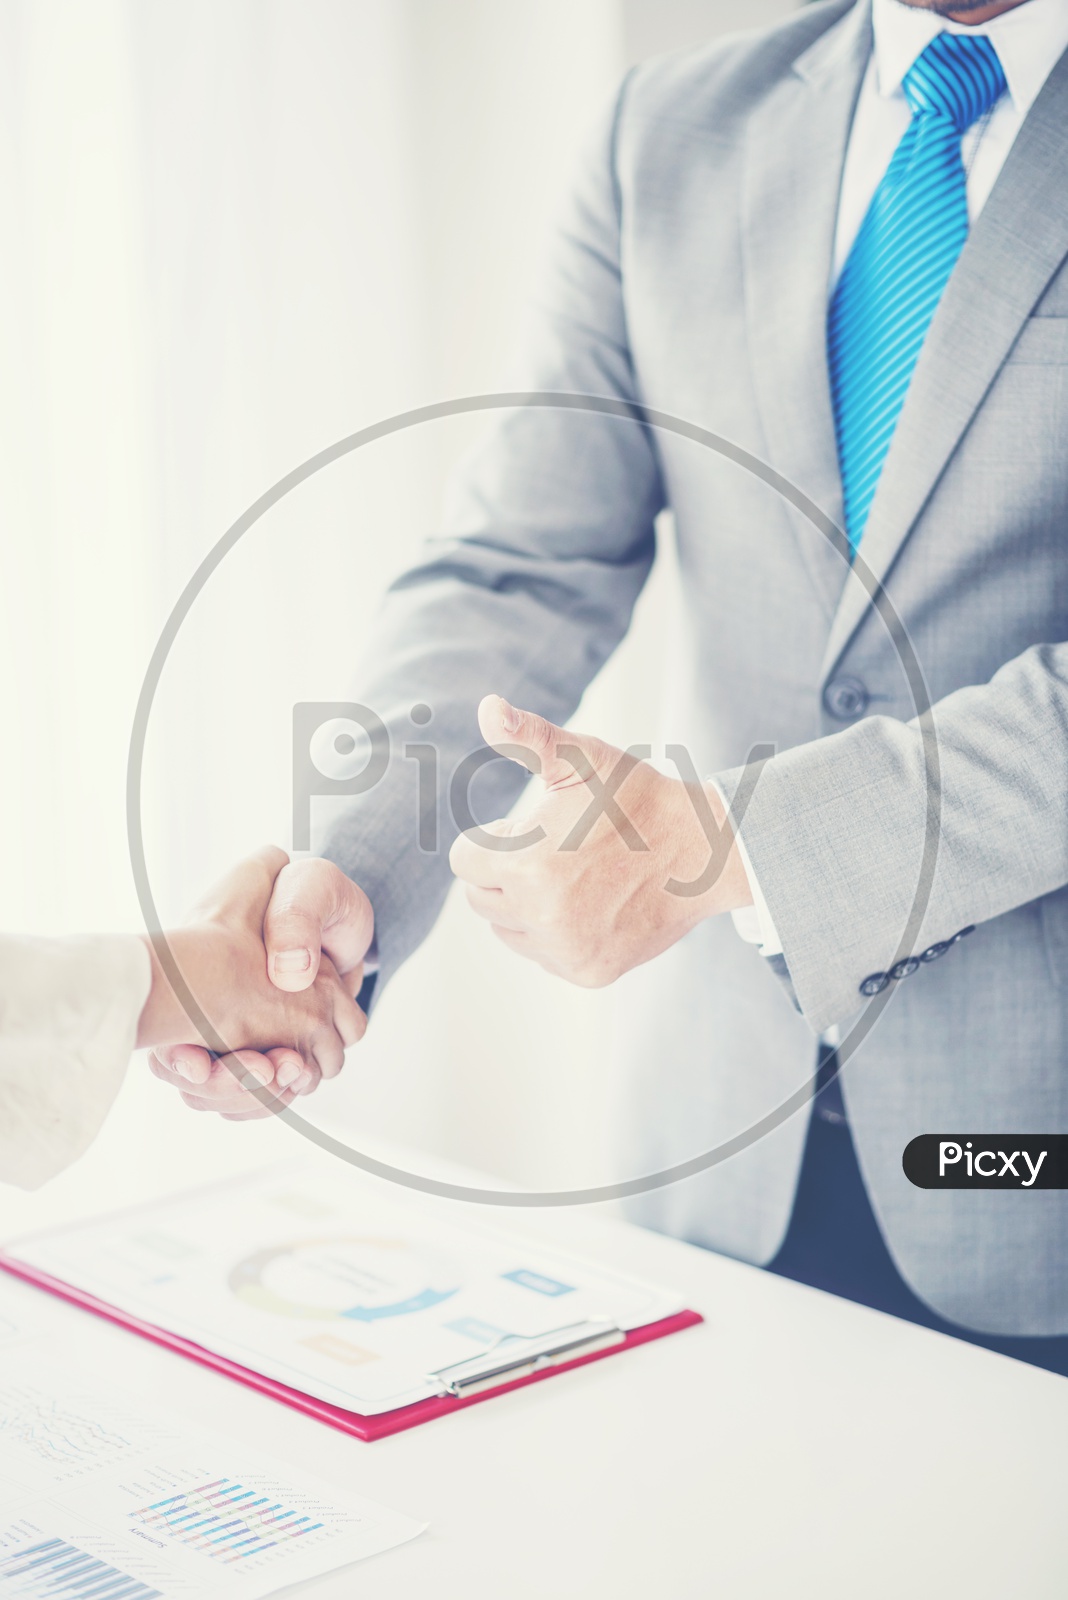 Business Success Greetings Concept With Business Partners Shaking Hands And Thump up Gesture Closeup Hands closeup